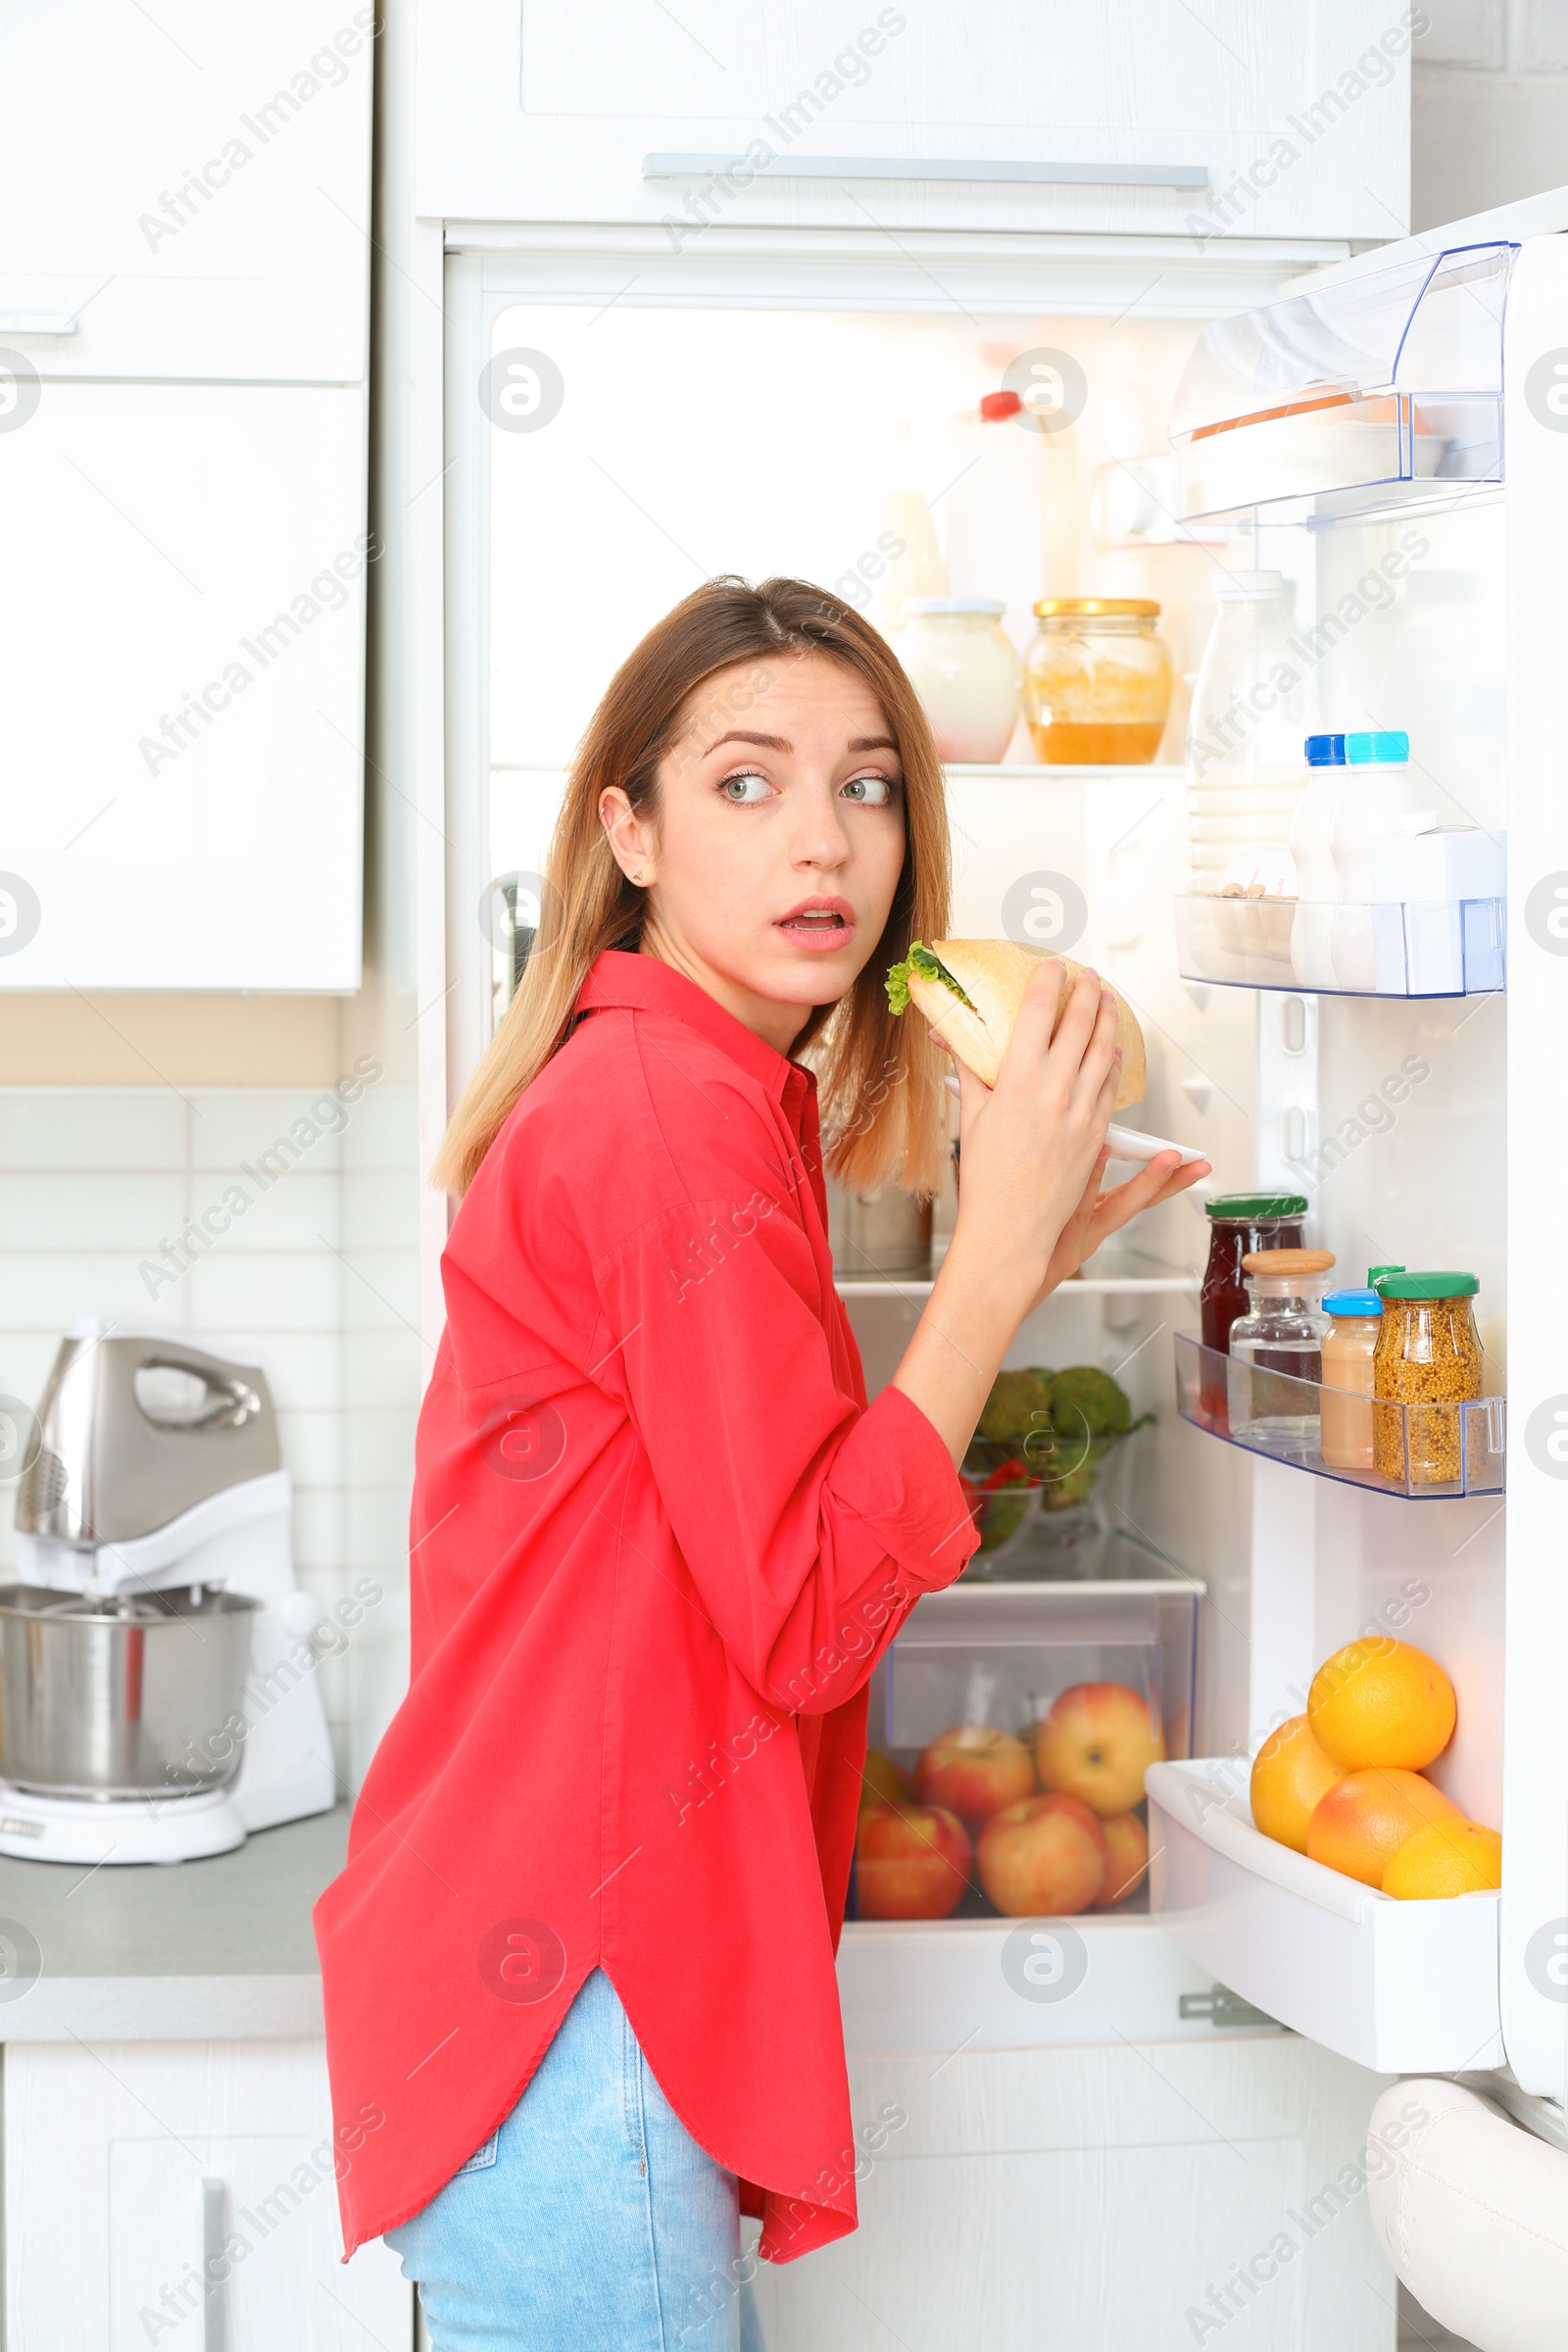 Photo of Emotional young woman eating sandwich near open refrigerator in kitchen. Failed diet